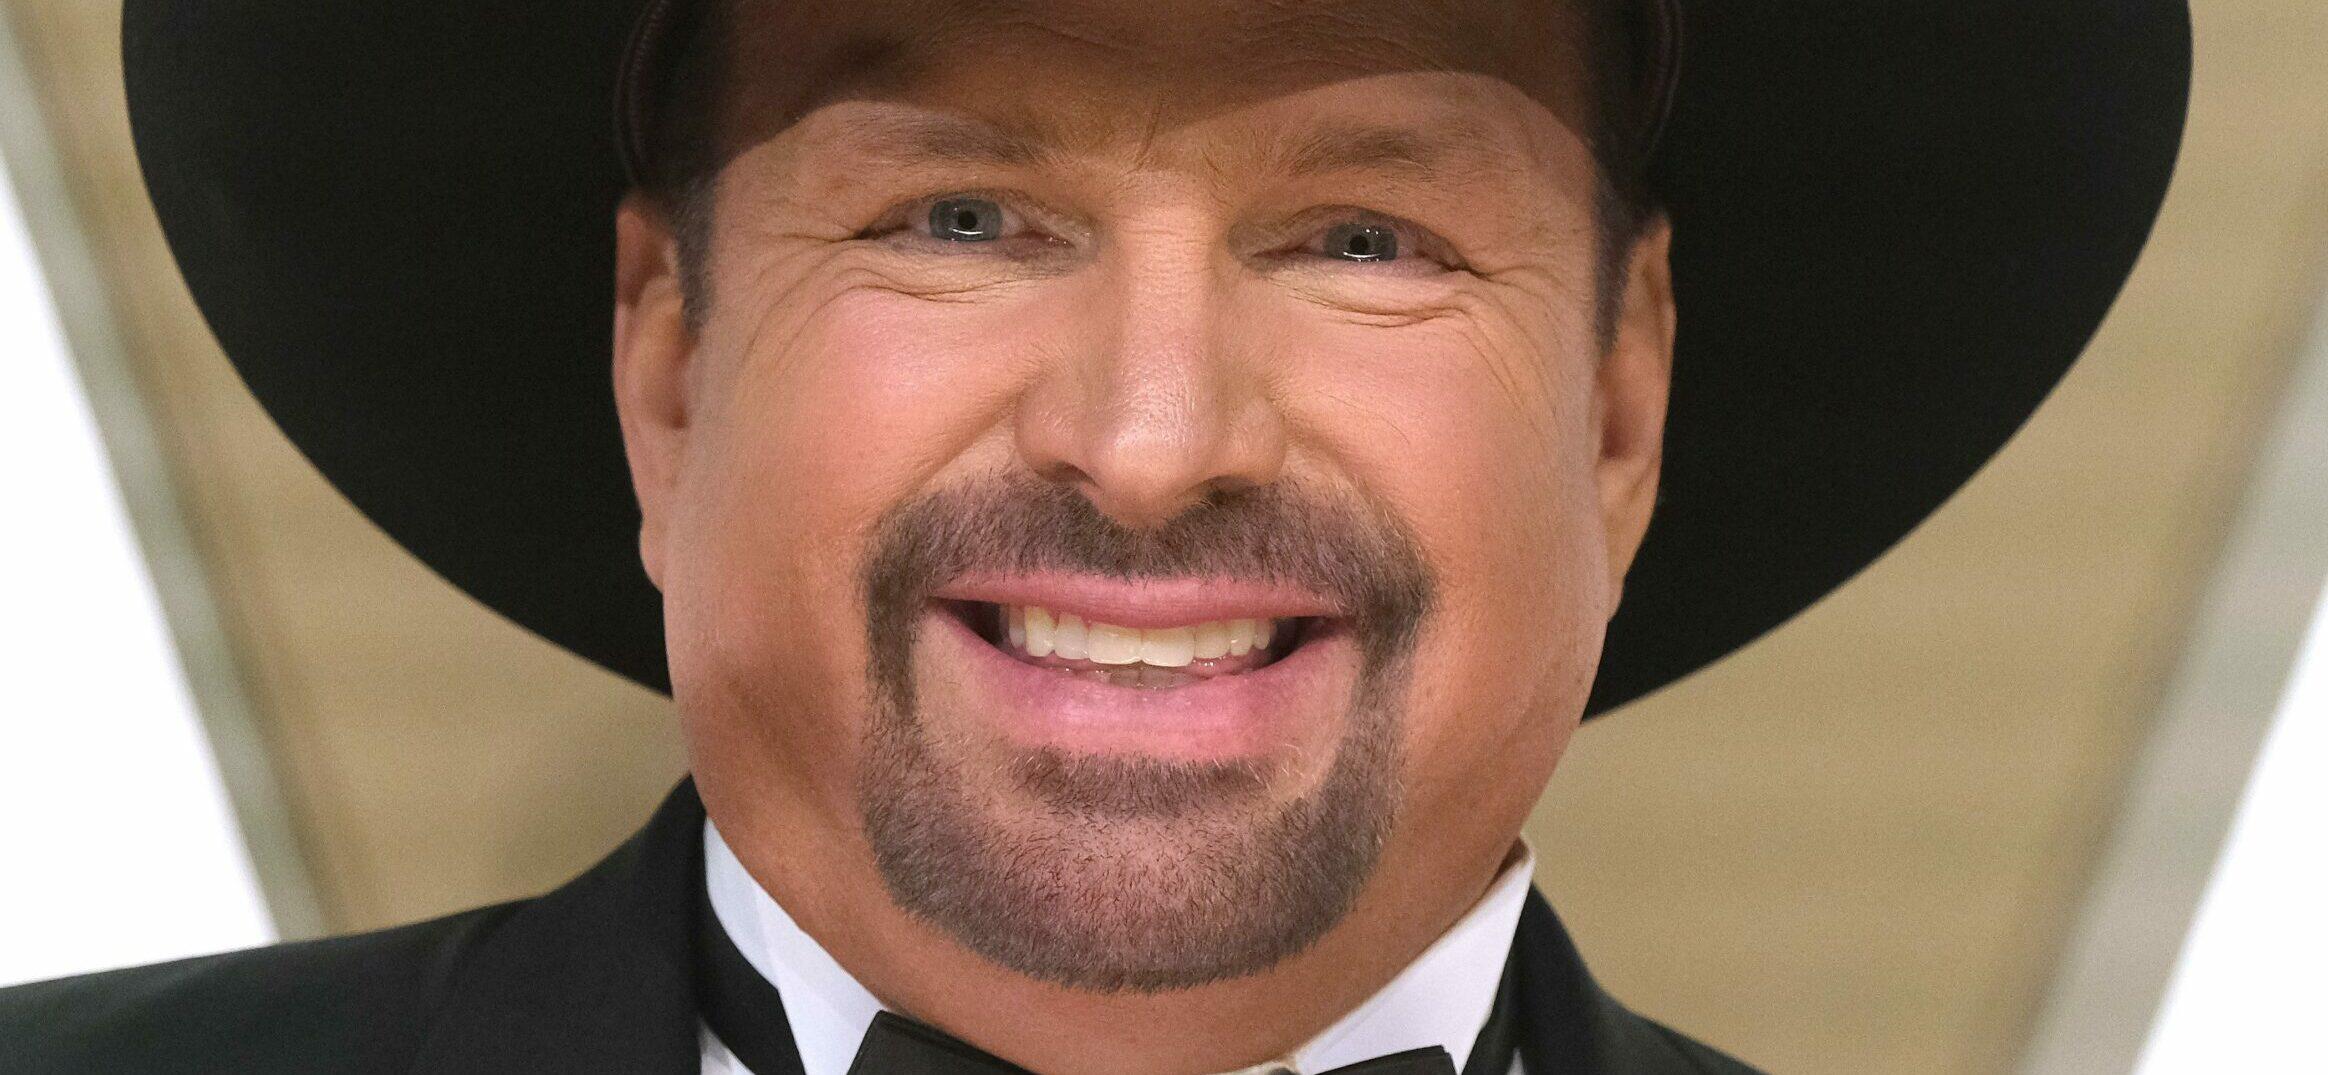 Garth Brooks at the The 53rd Annual CMA Awards - Arrivals